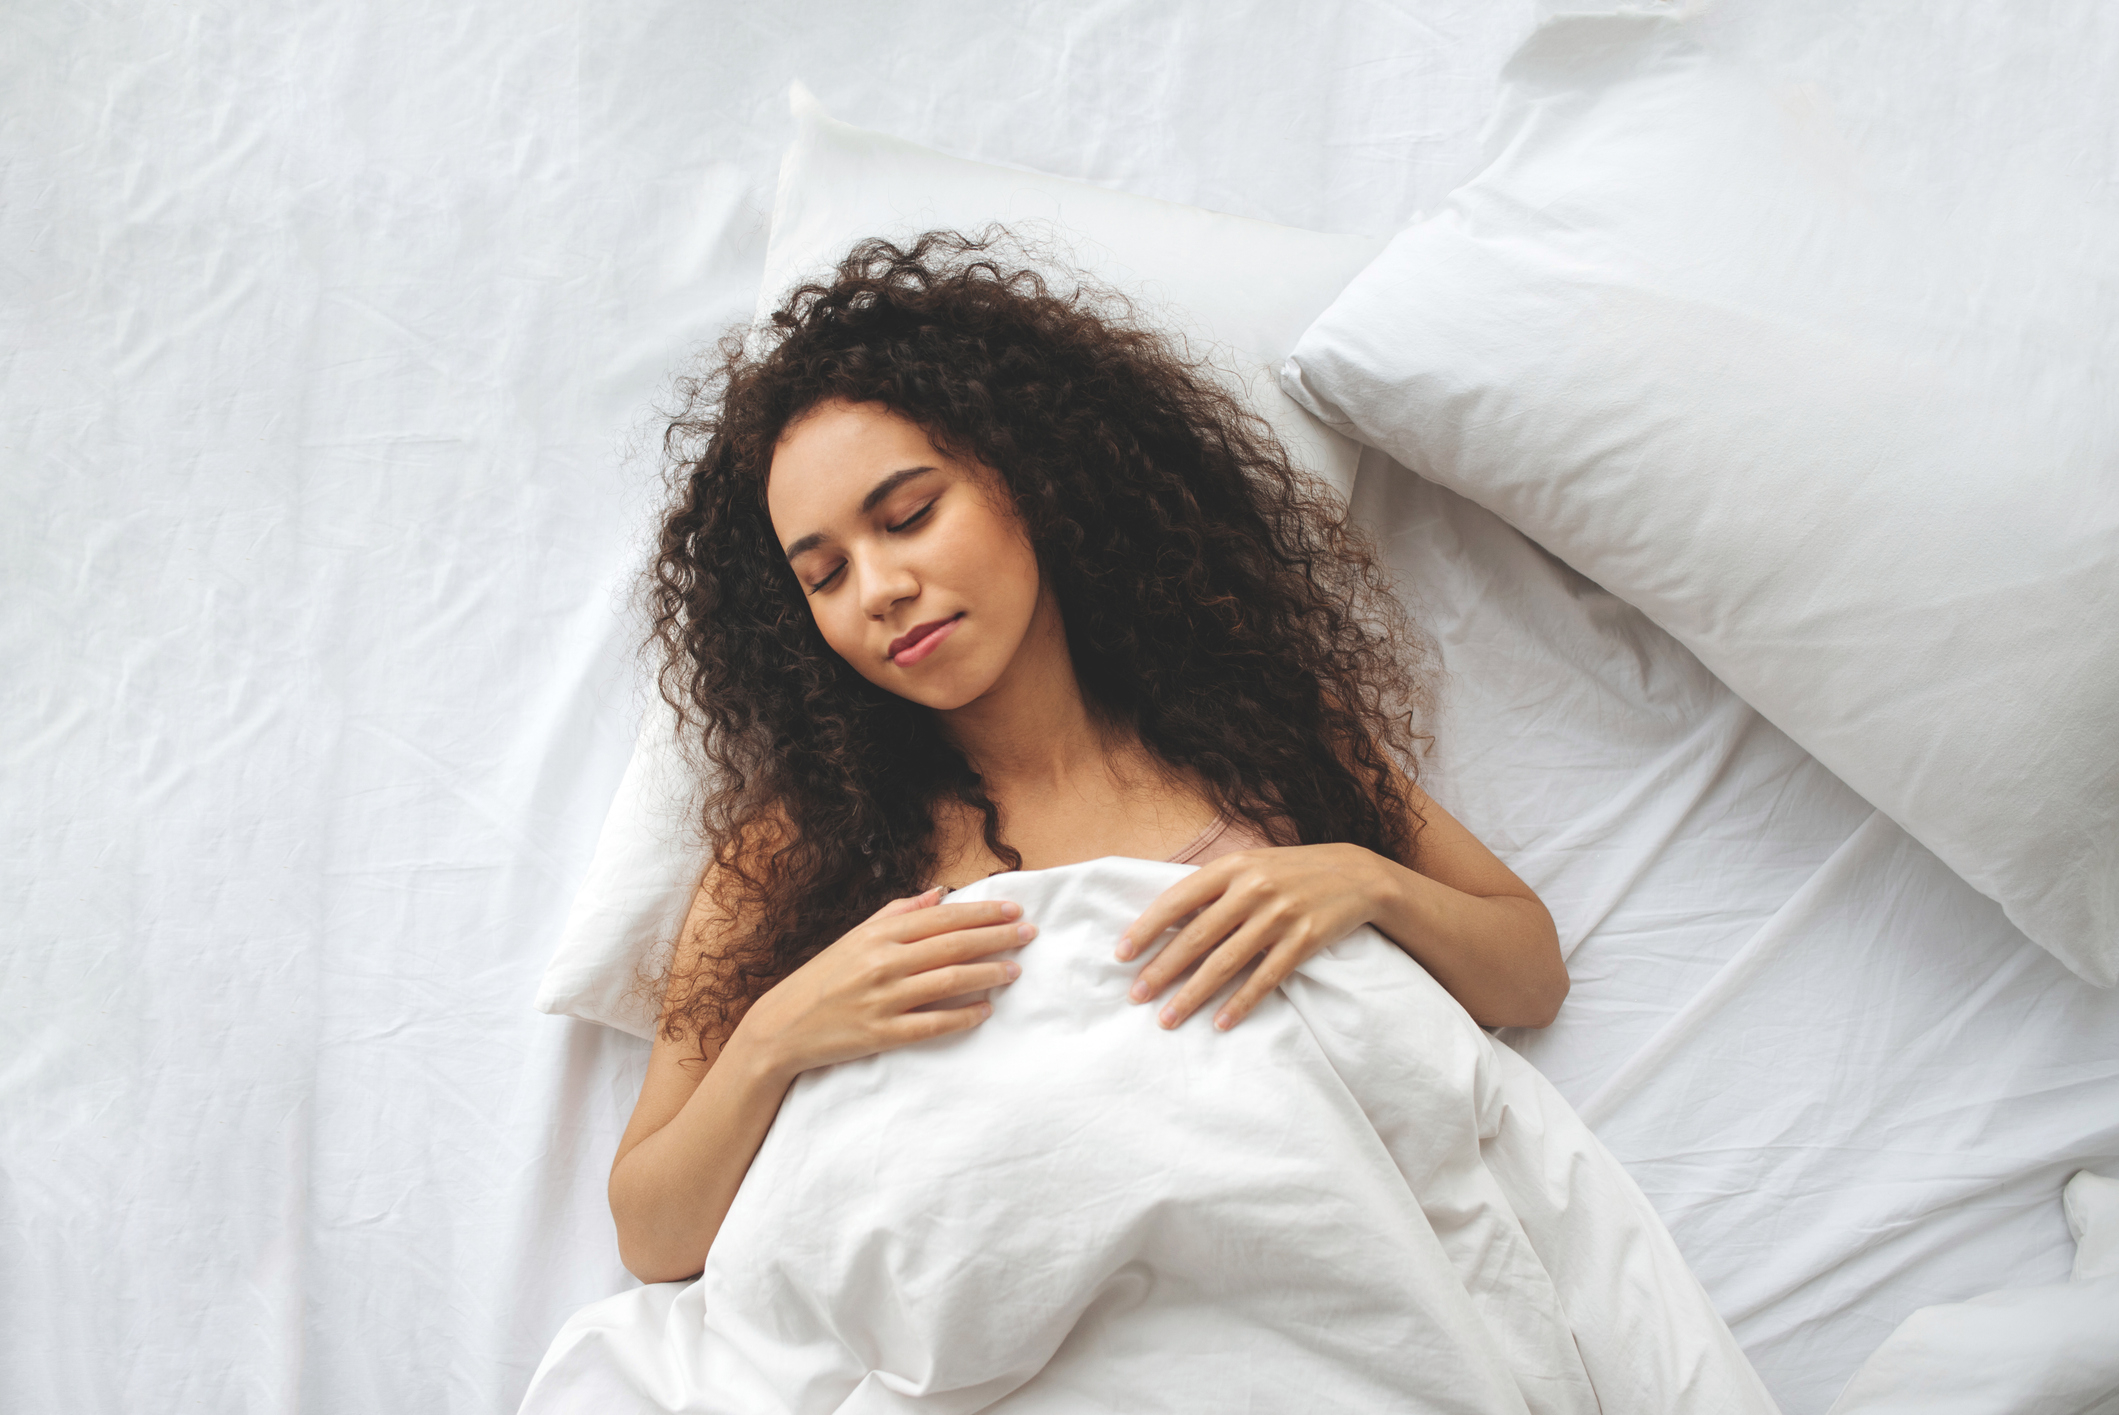 A person with curly hair lies peacefully in bed, covered by white sheets, with a soft smile on their face, portraying relaxation and contentment